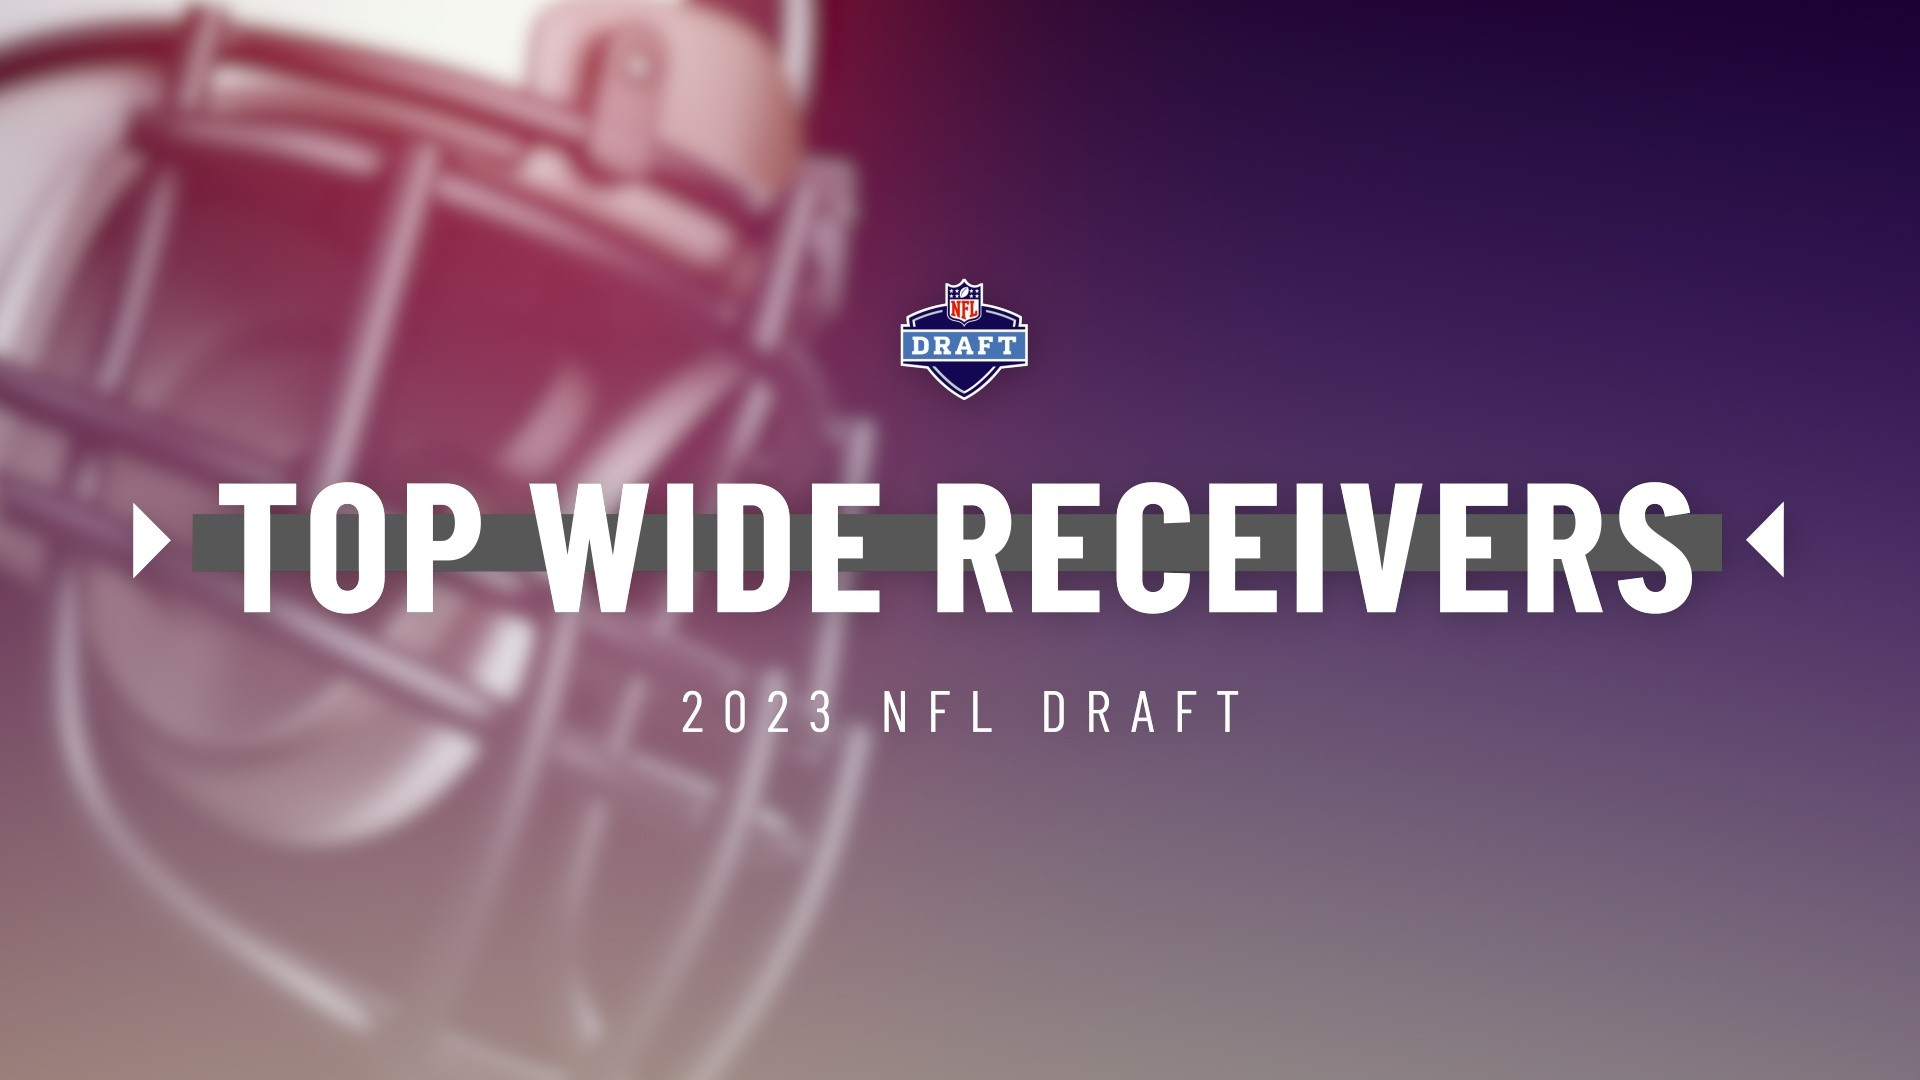 Top Wide Receivers in the 2023 NFL Draft